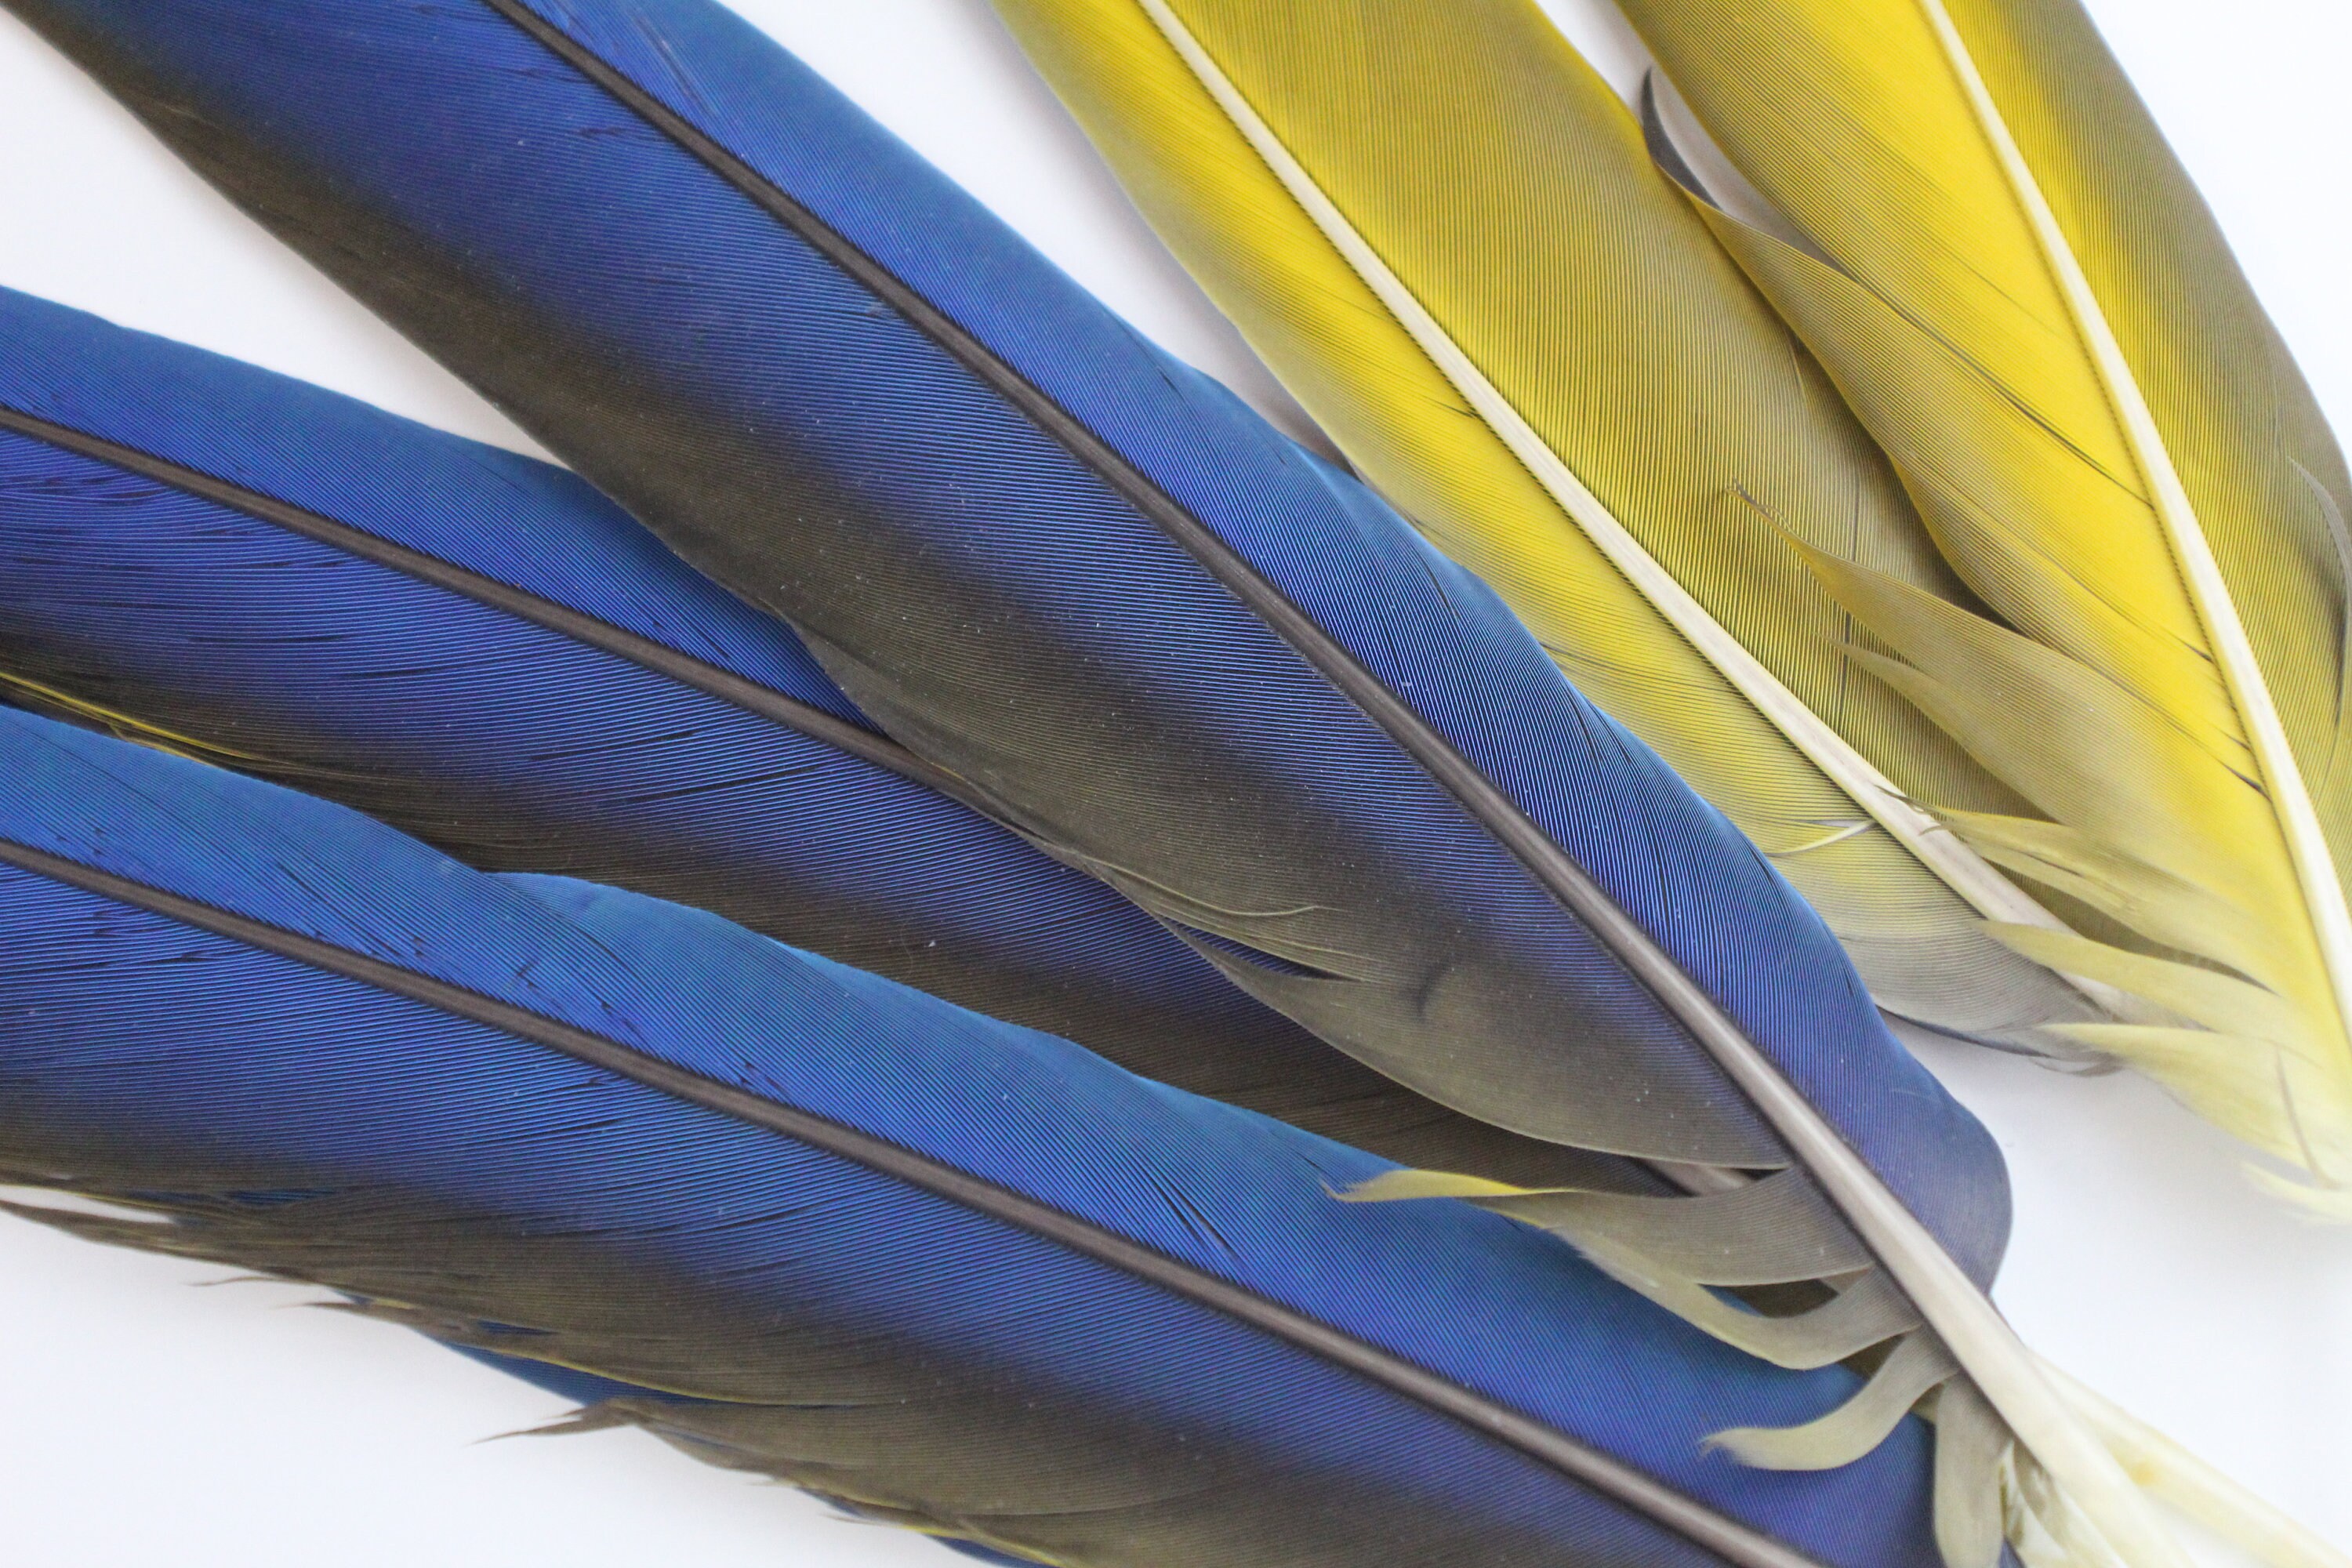 Blue Bird Feathers at Rs 1800/pack, Birds Feather in Ghaziabad